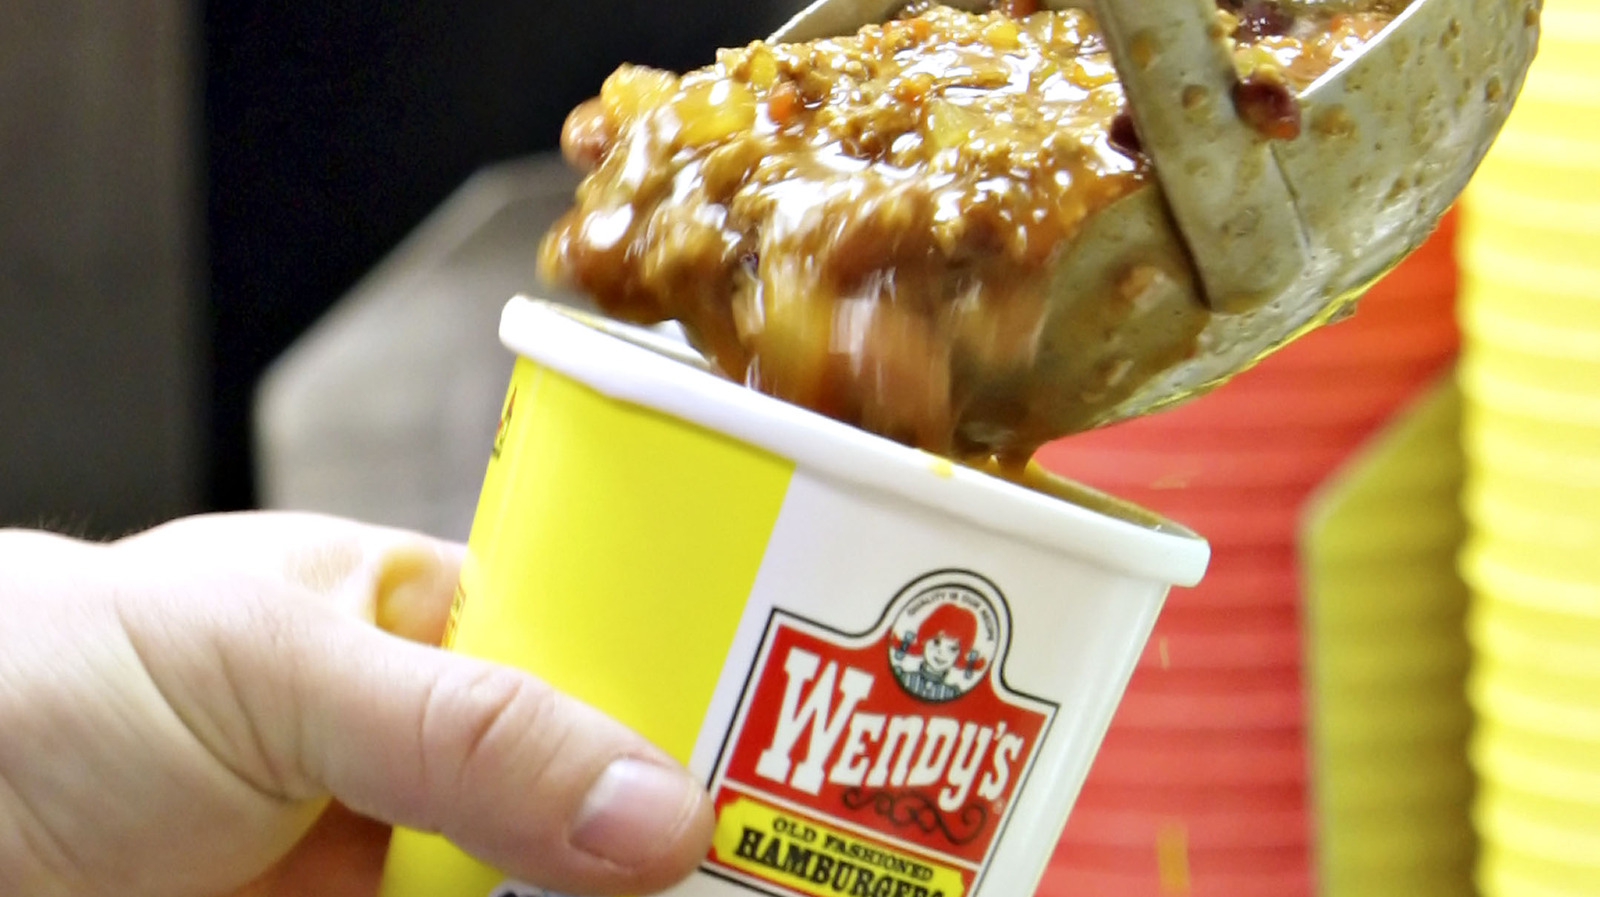 The Real Reason You Should Avoid The Chili At Wendy's